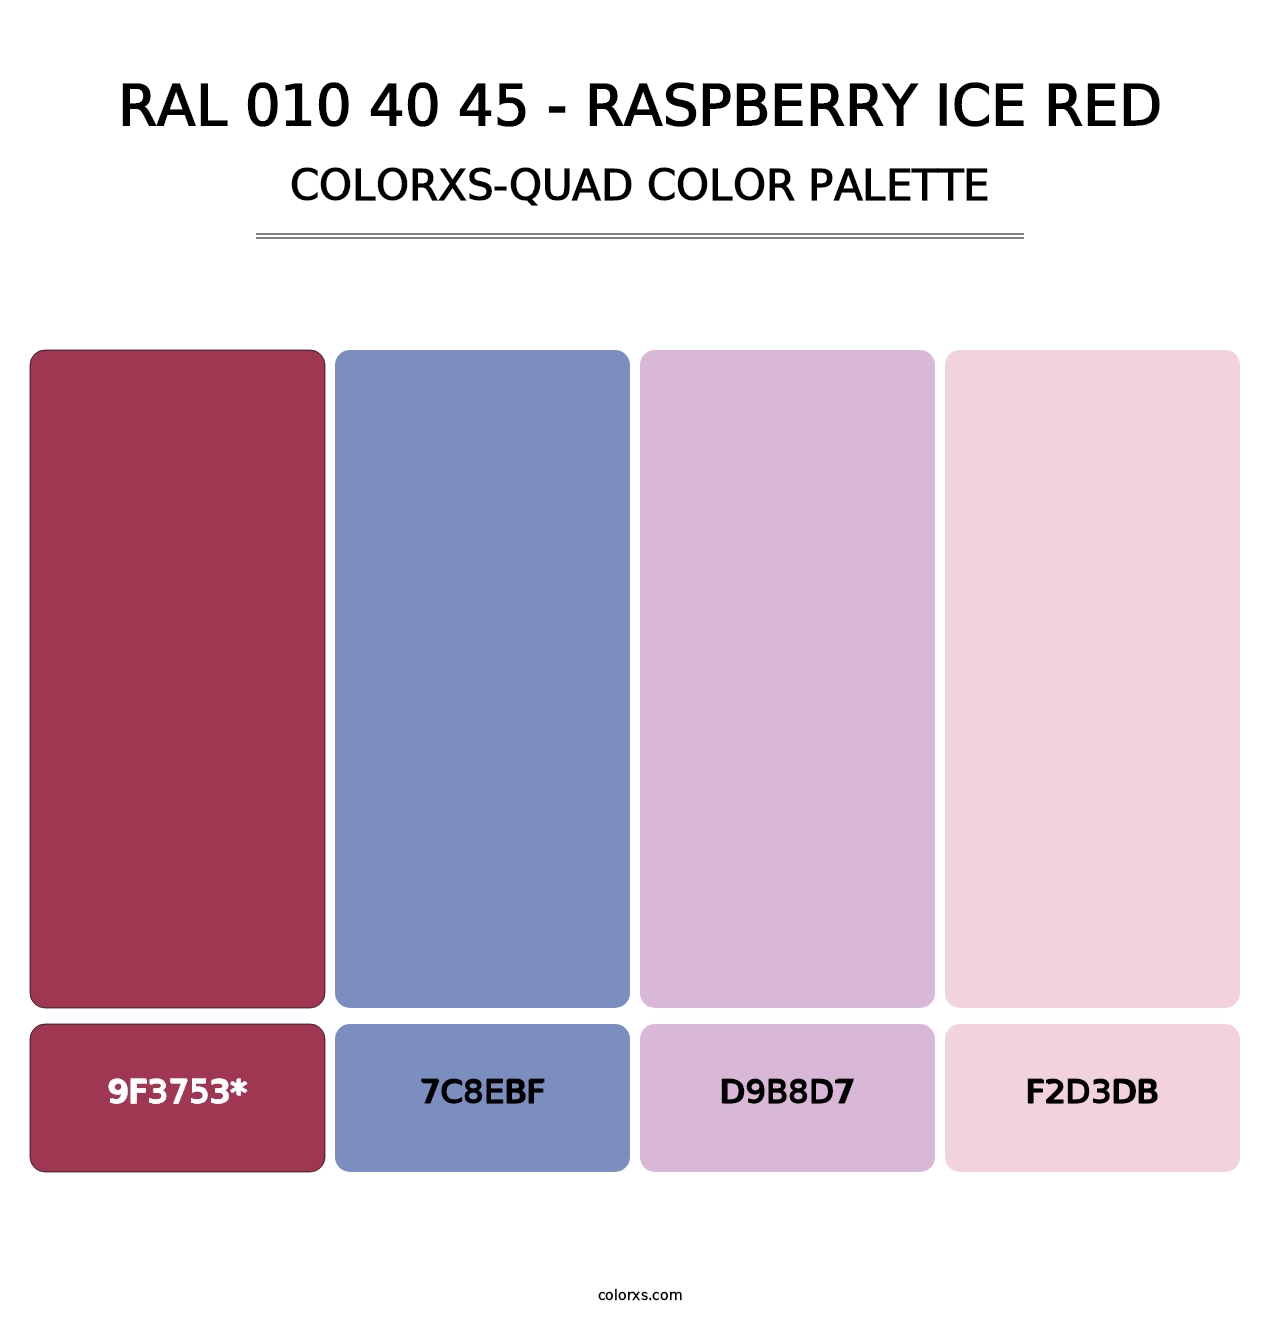 RAL 010 40 45 - Raspberry Ice Red - Colorxs Quad Palette